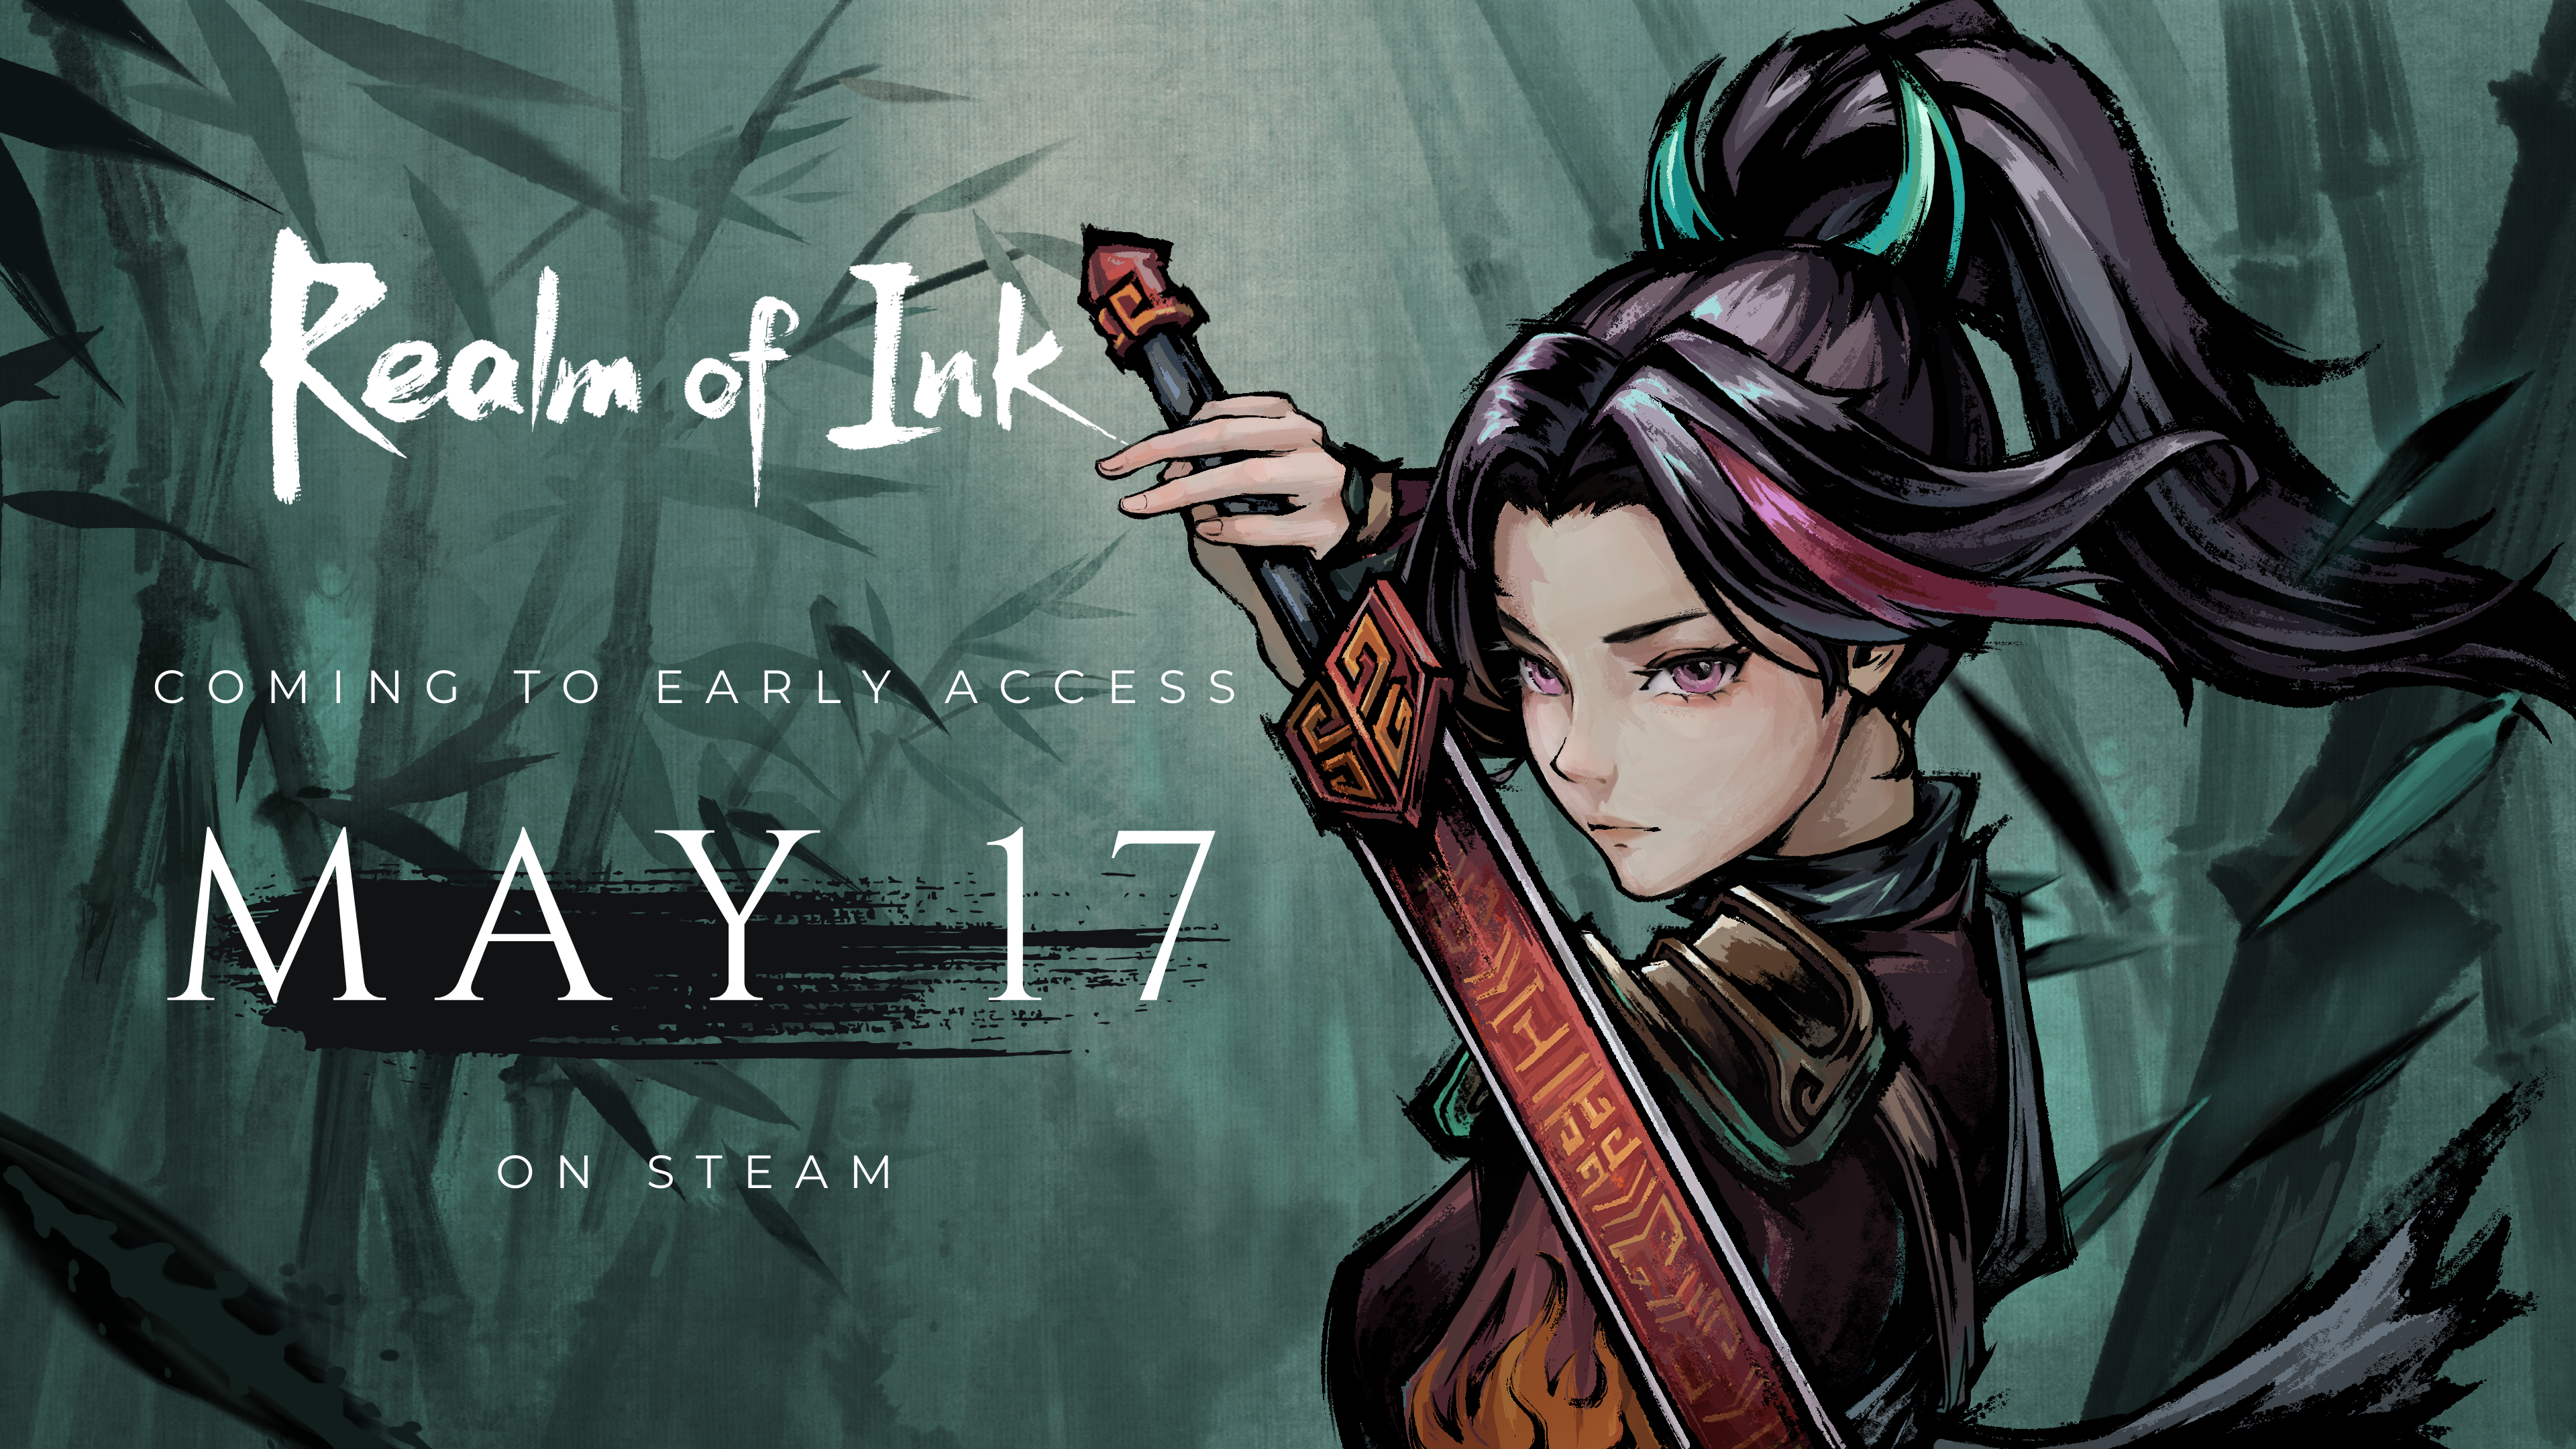 Realm of Ink will launch in Early Access on May 17th